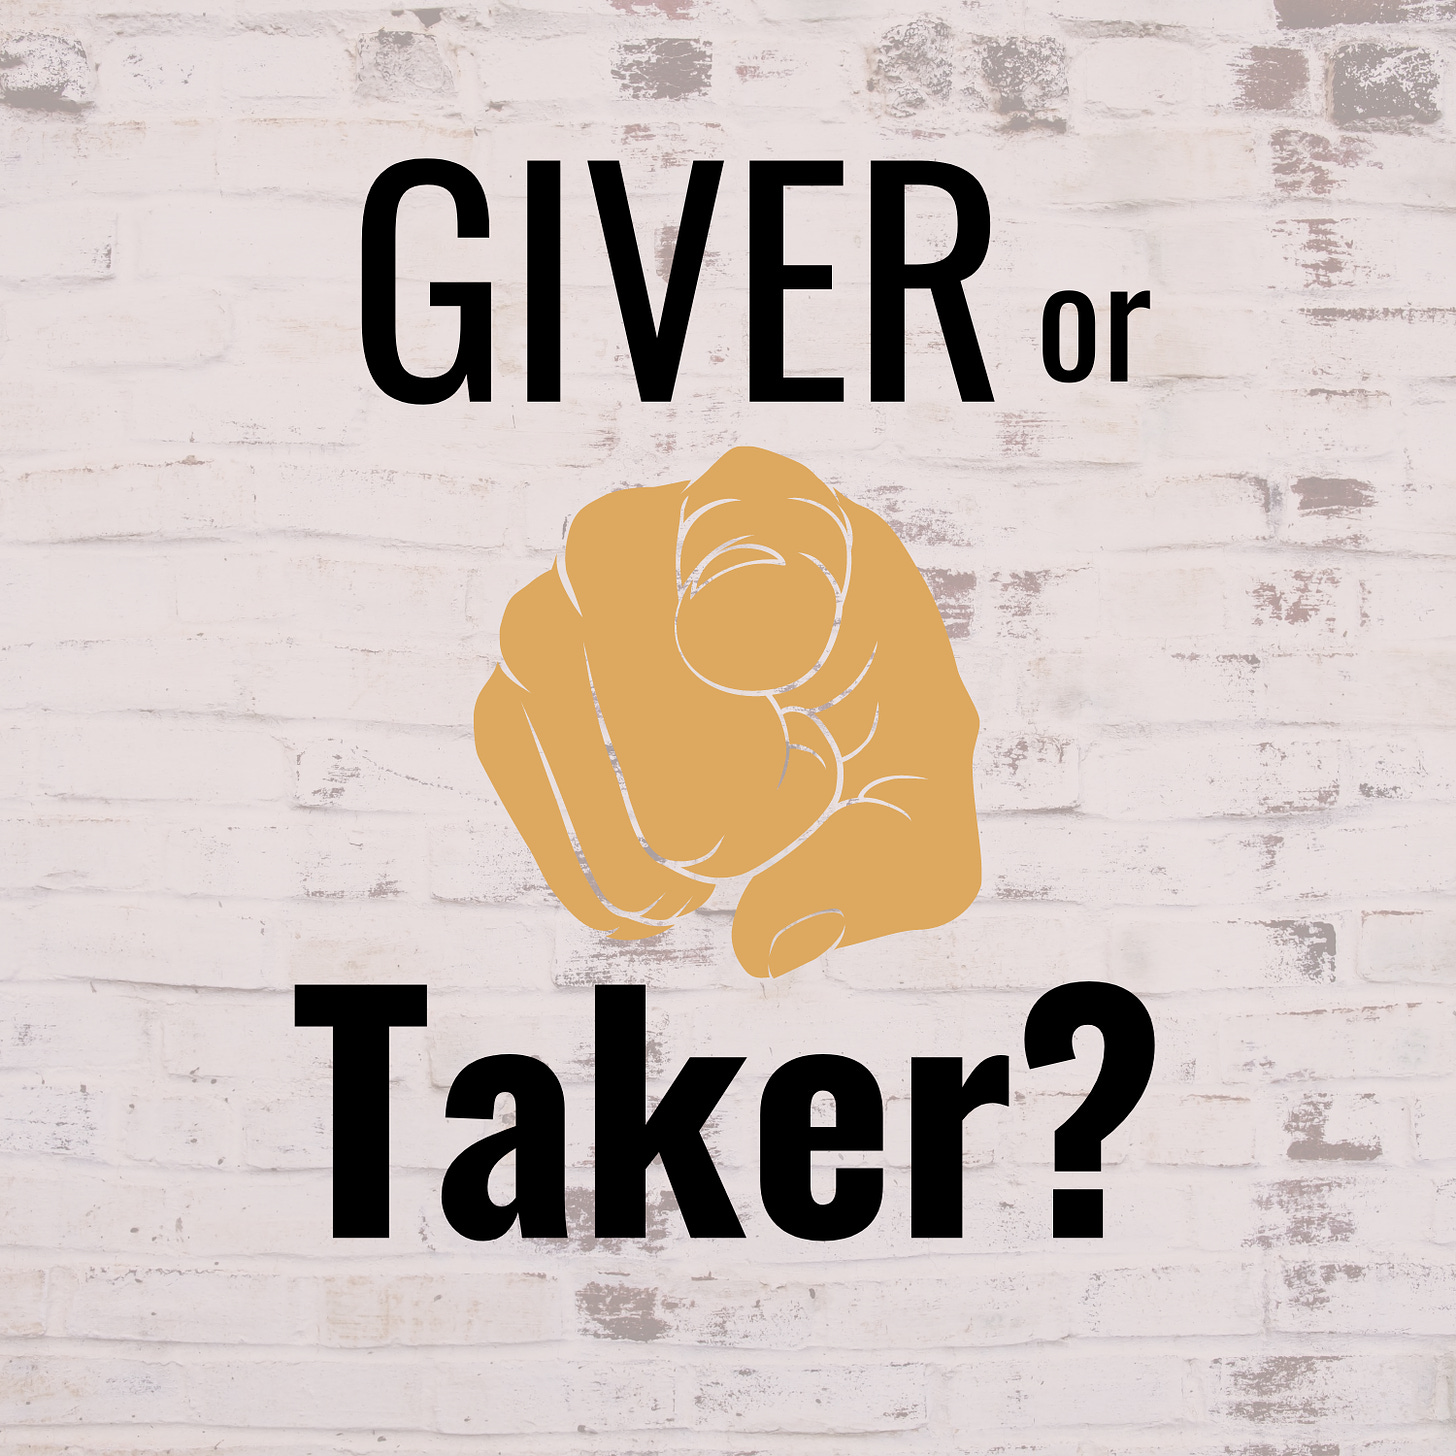 Are you a Giver of a Taker?